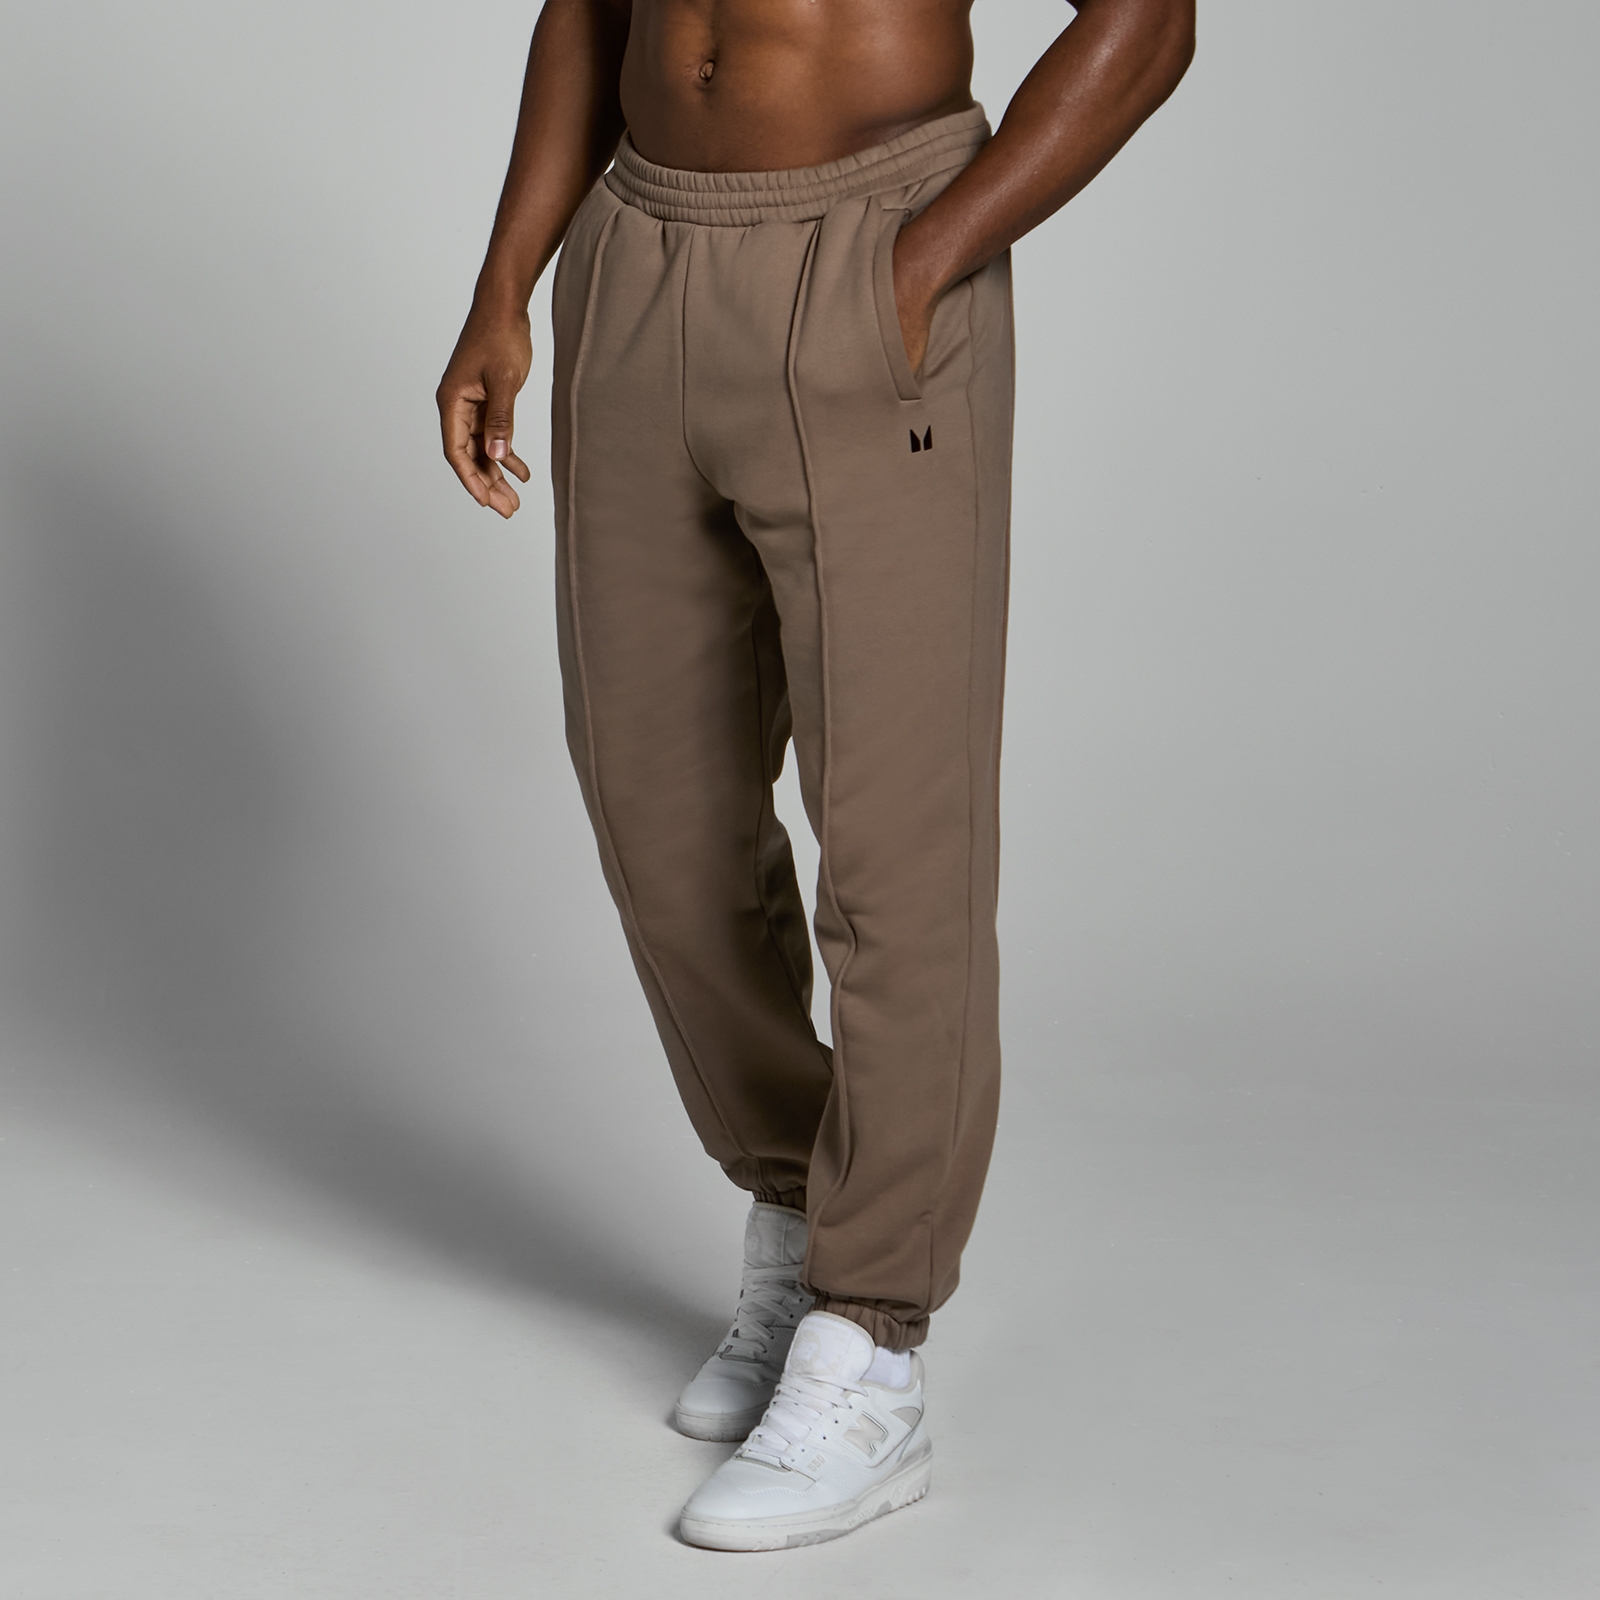 MP Men's Lifestyle Heavyweight Oversized Joggers - Soft Brown - XS